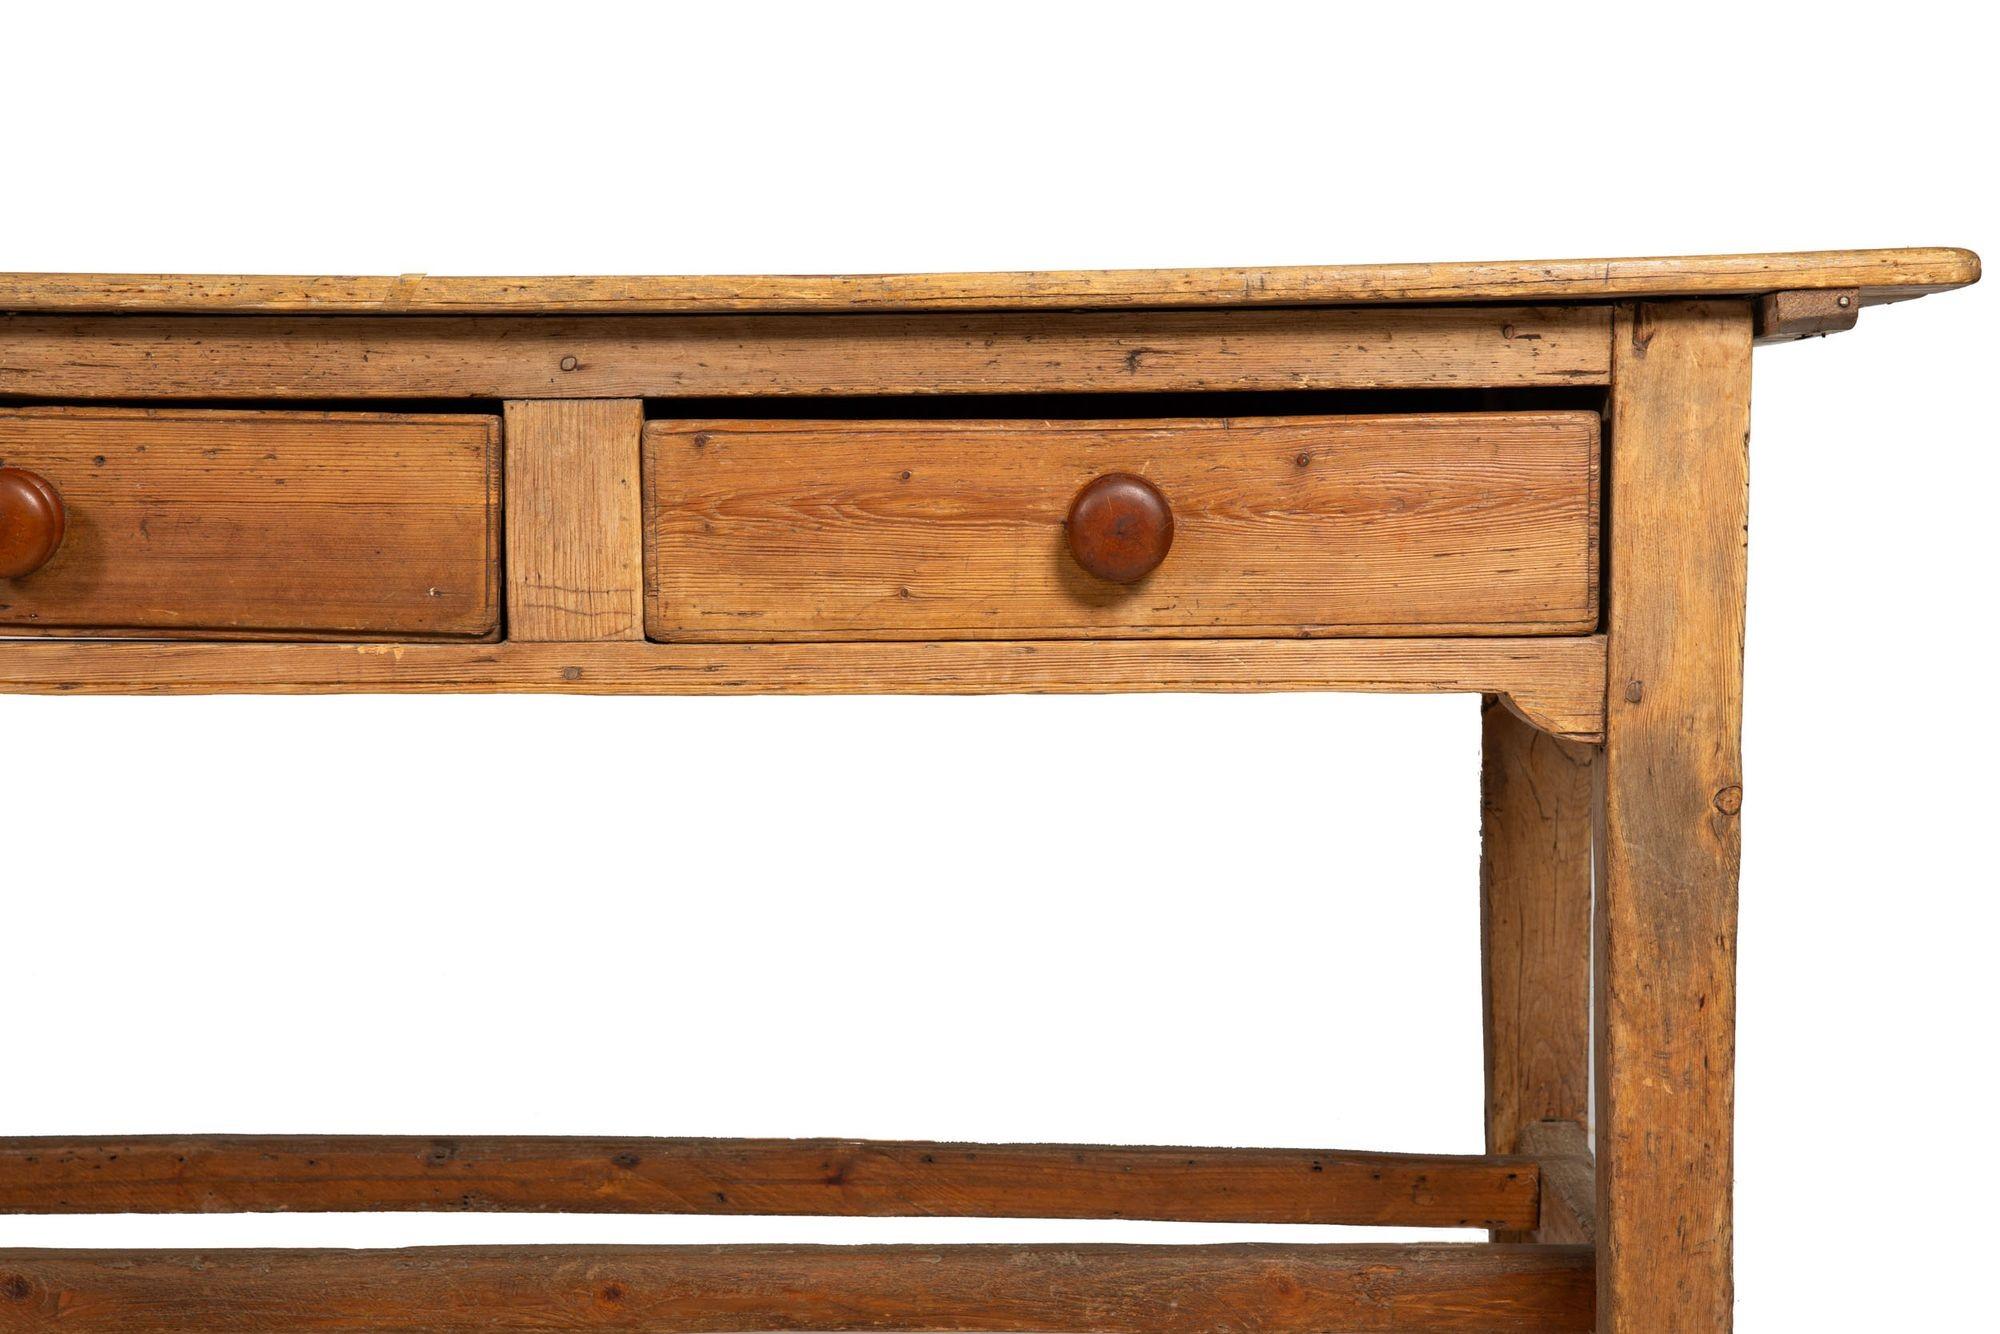 Worn and Patinated English Antique Pine Tavern Table Desk For Sale 2